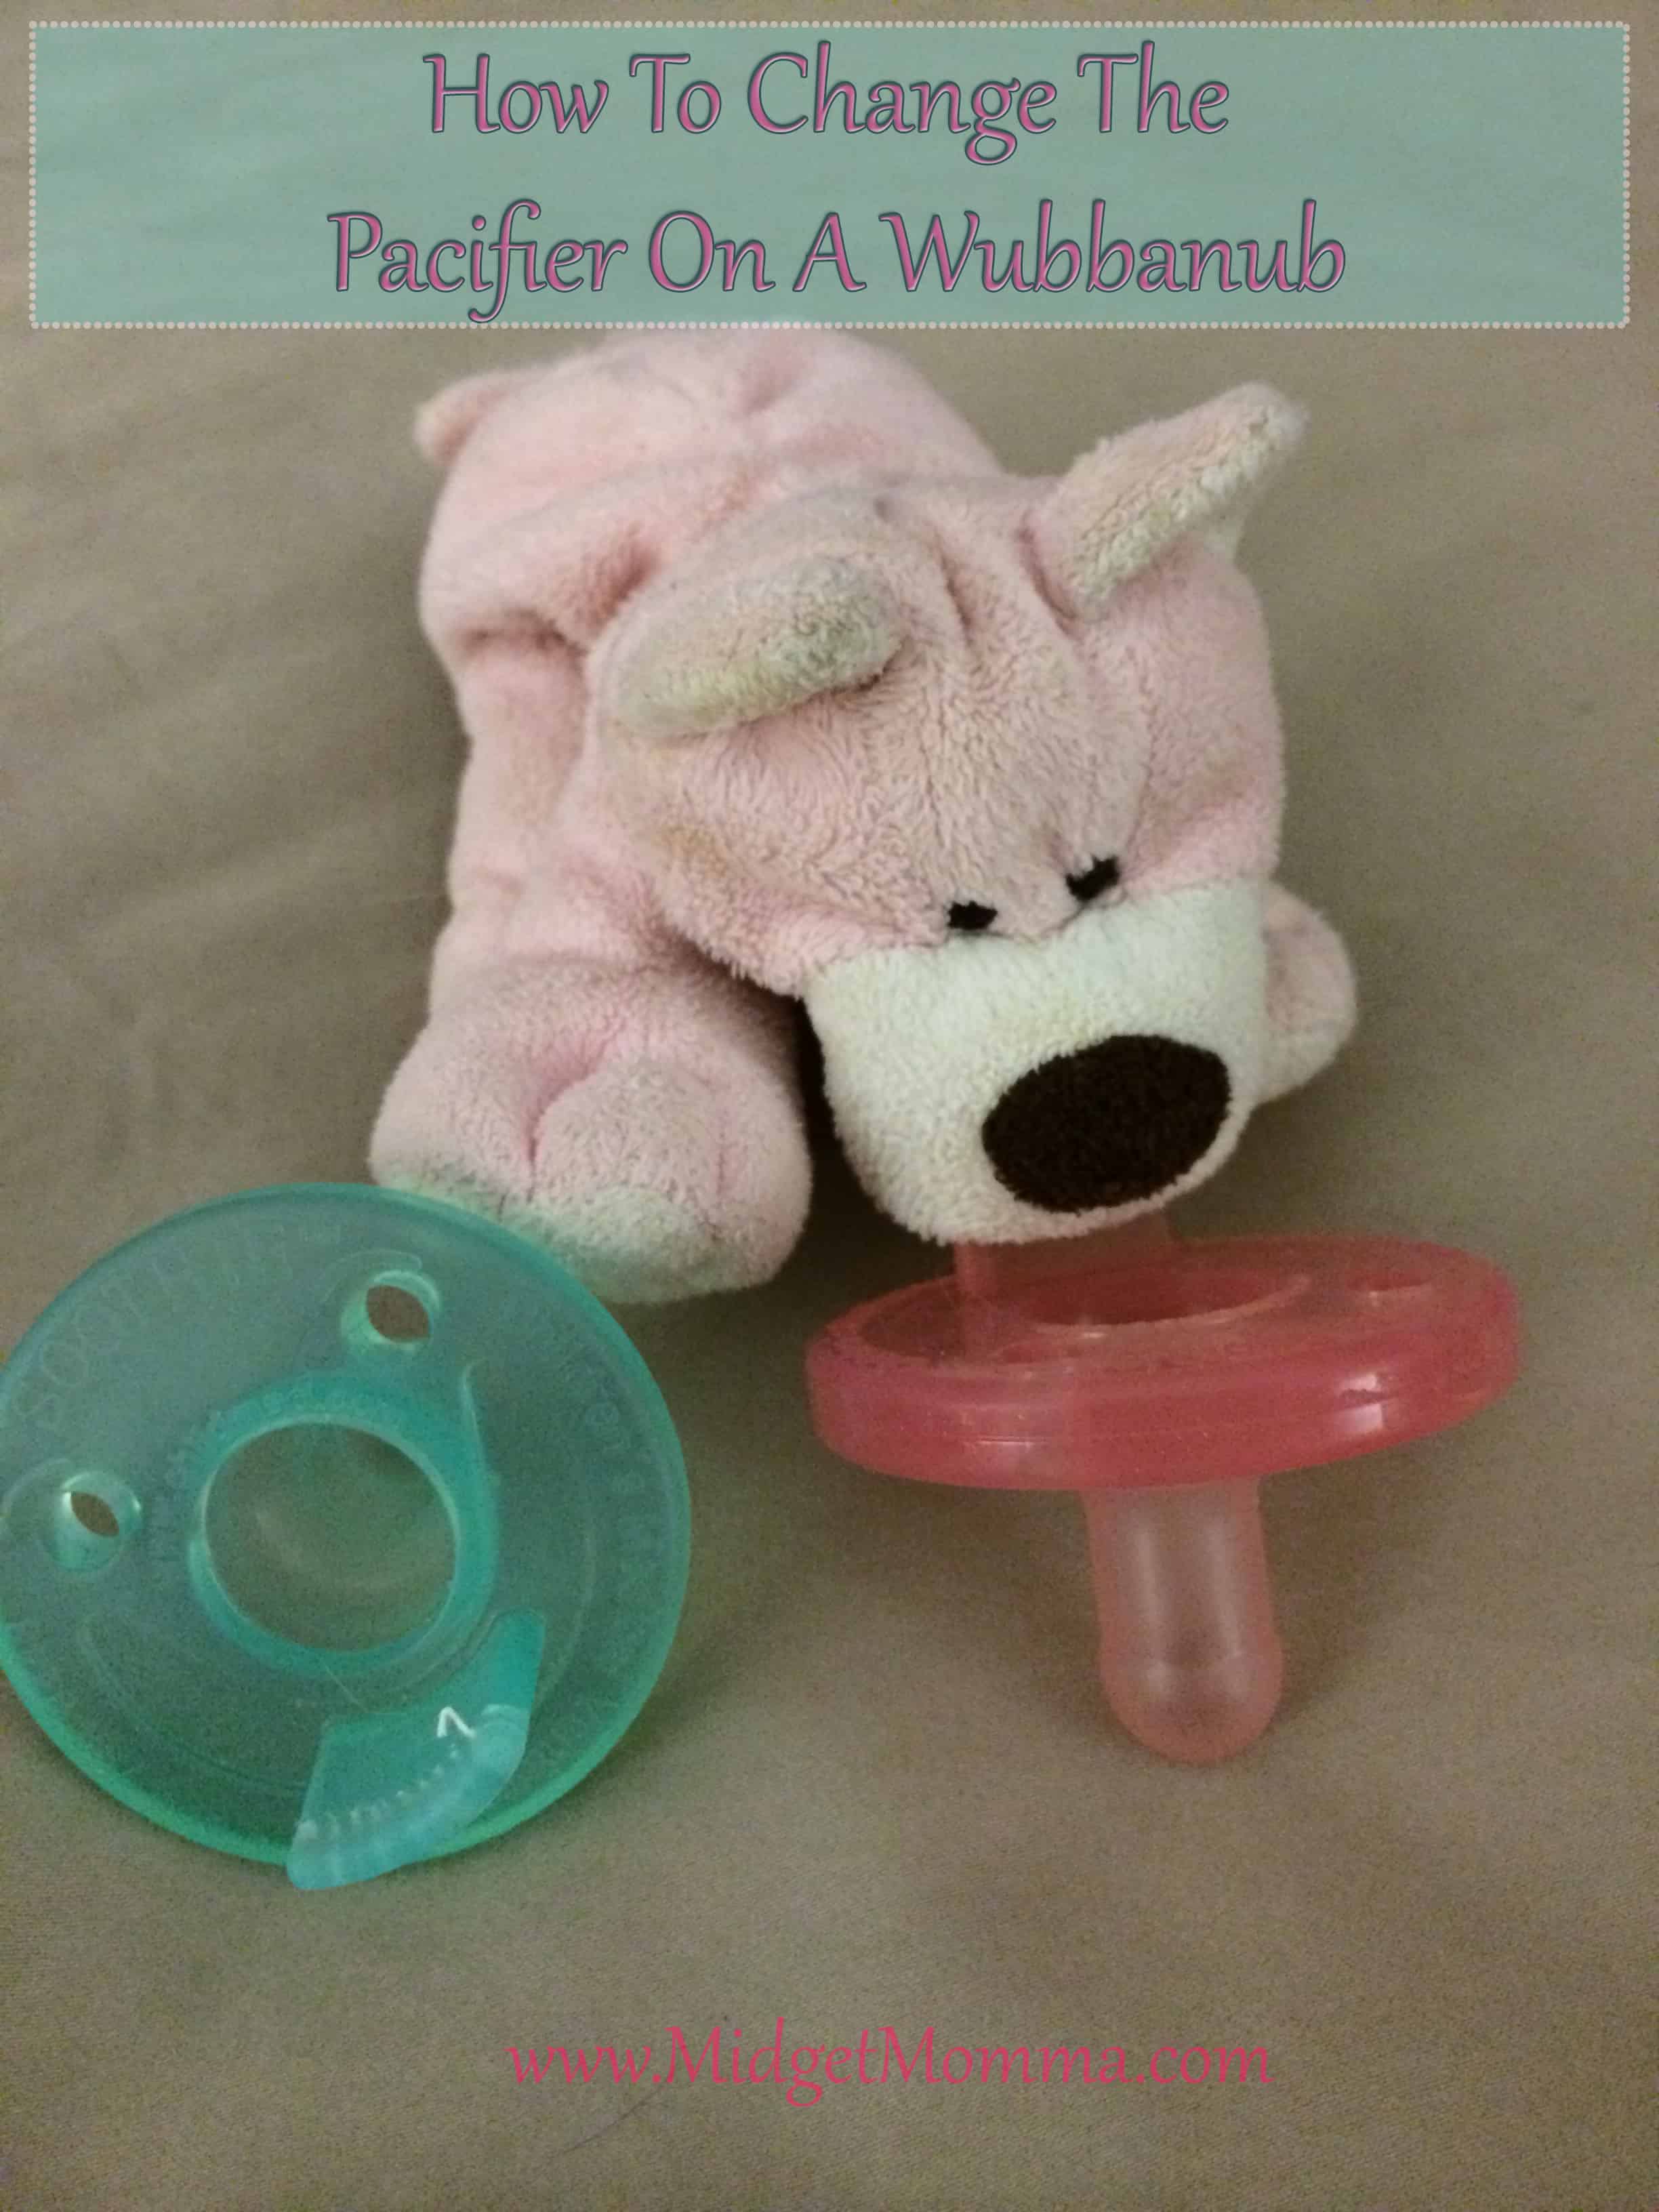 How To Change The Pacifier On A Wubbanub Step by Step Directions